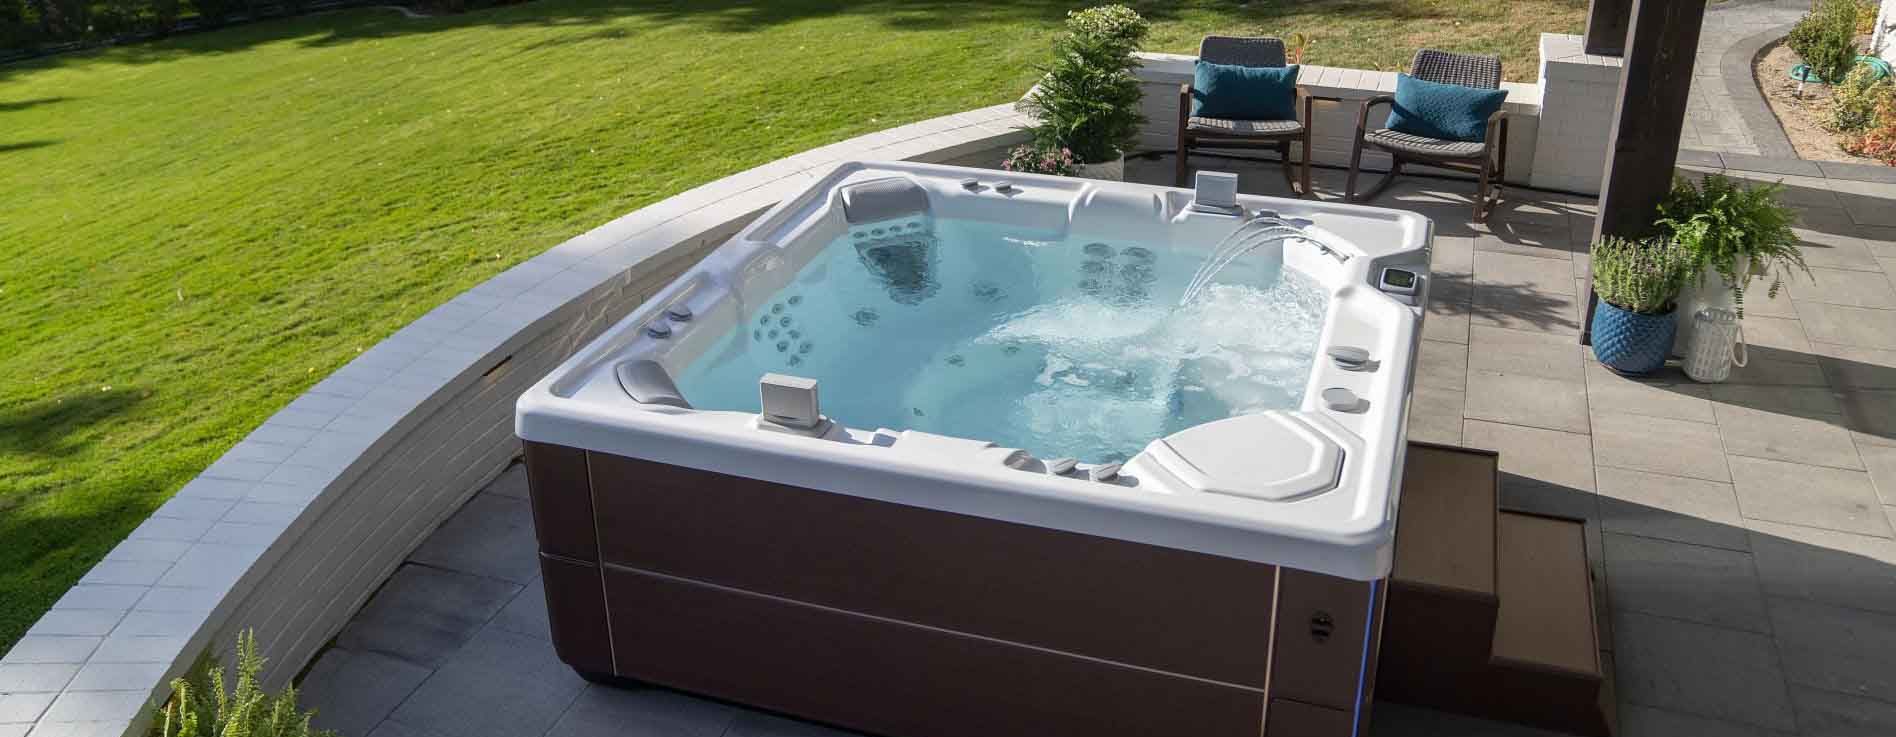 Hot Tub Water Care How-To: Weekly Maintenance